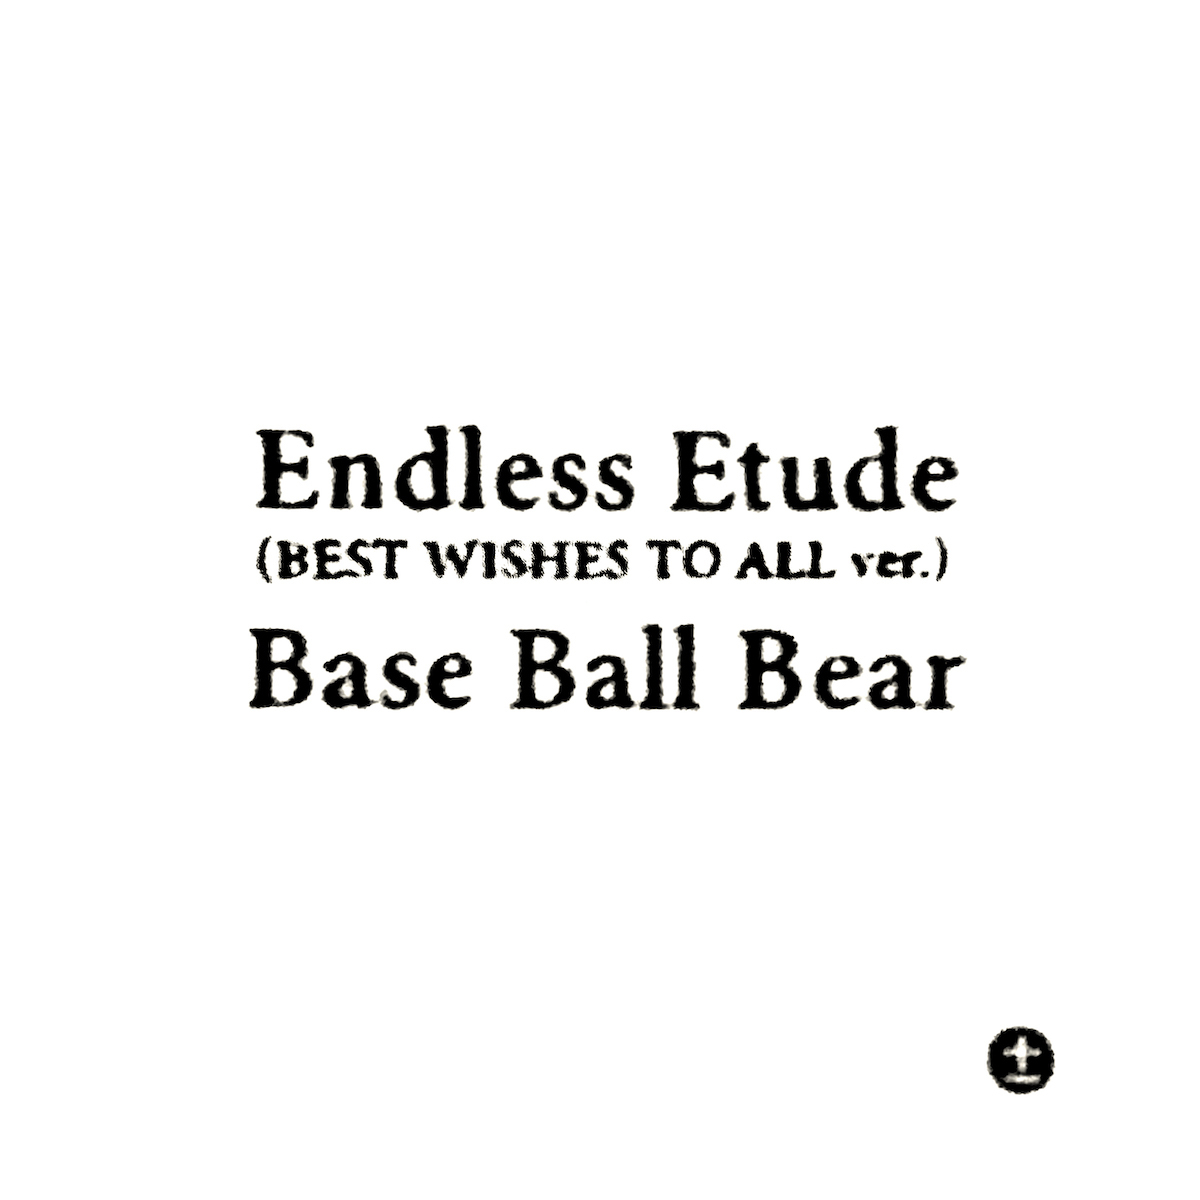 「Endless Etude (BEST WISHES TO ALL ver.)」